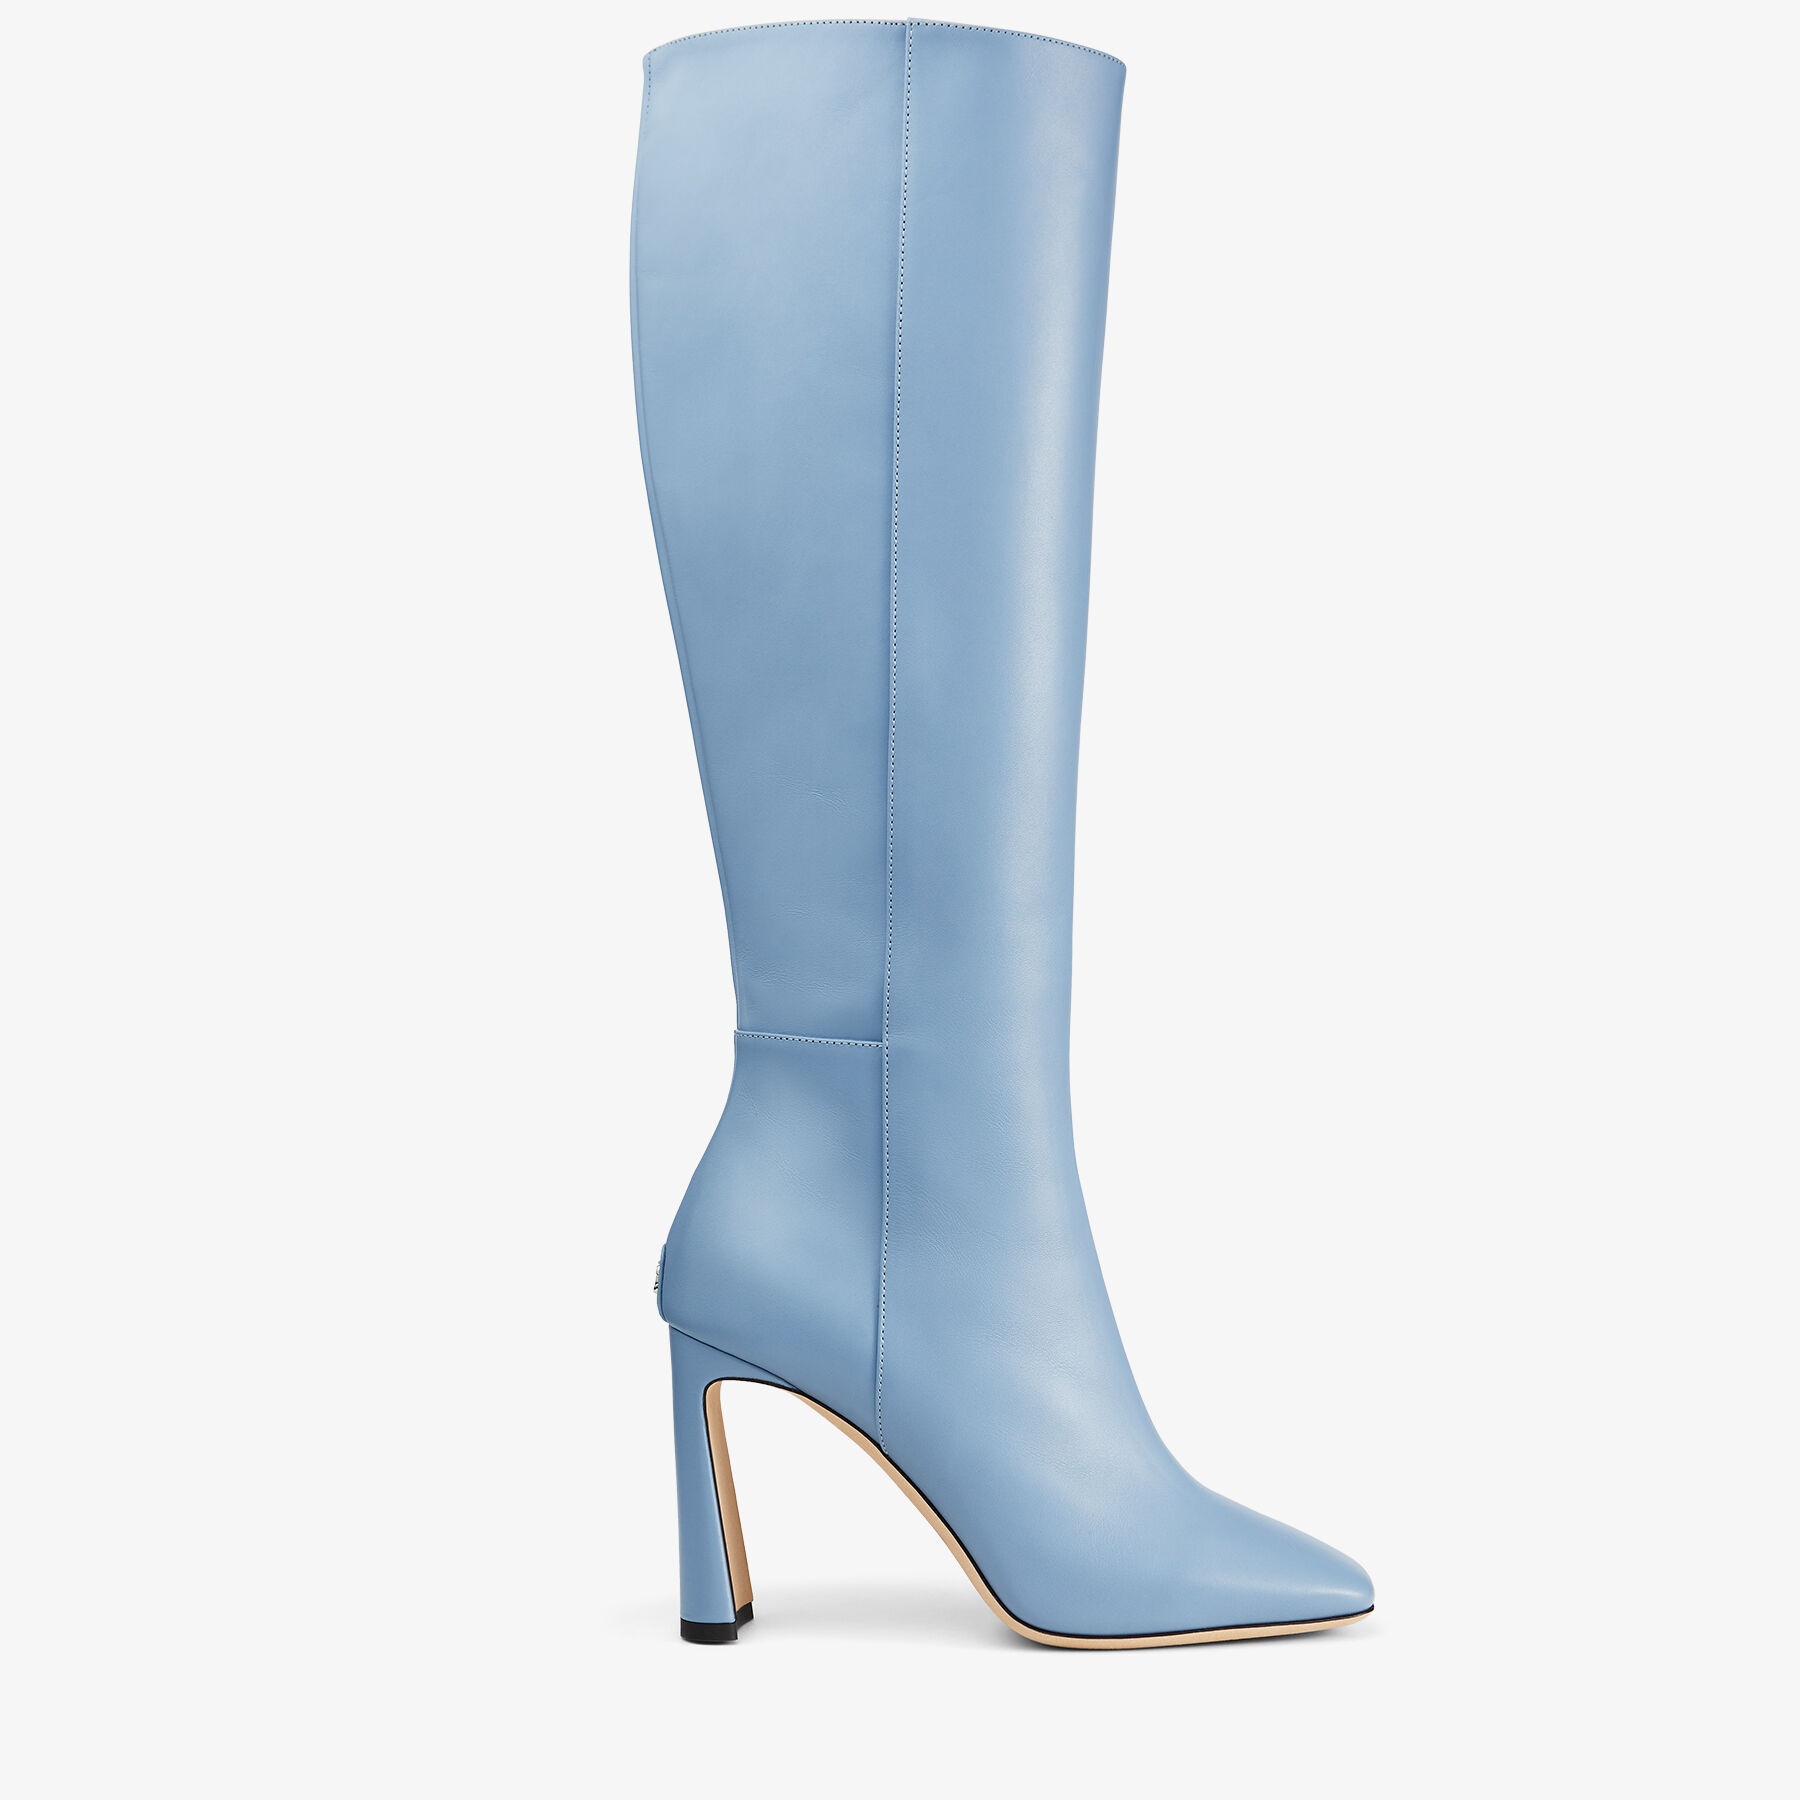 Kinsey 95
Smoky Blue Calf Leather Knee-High Boots - 1